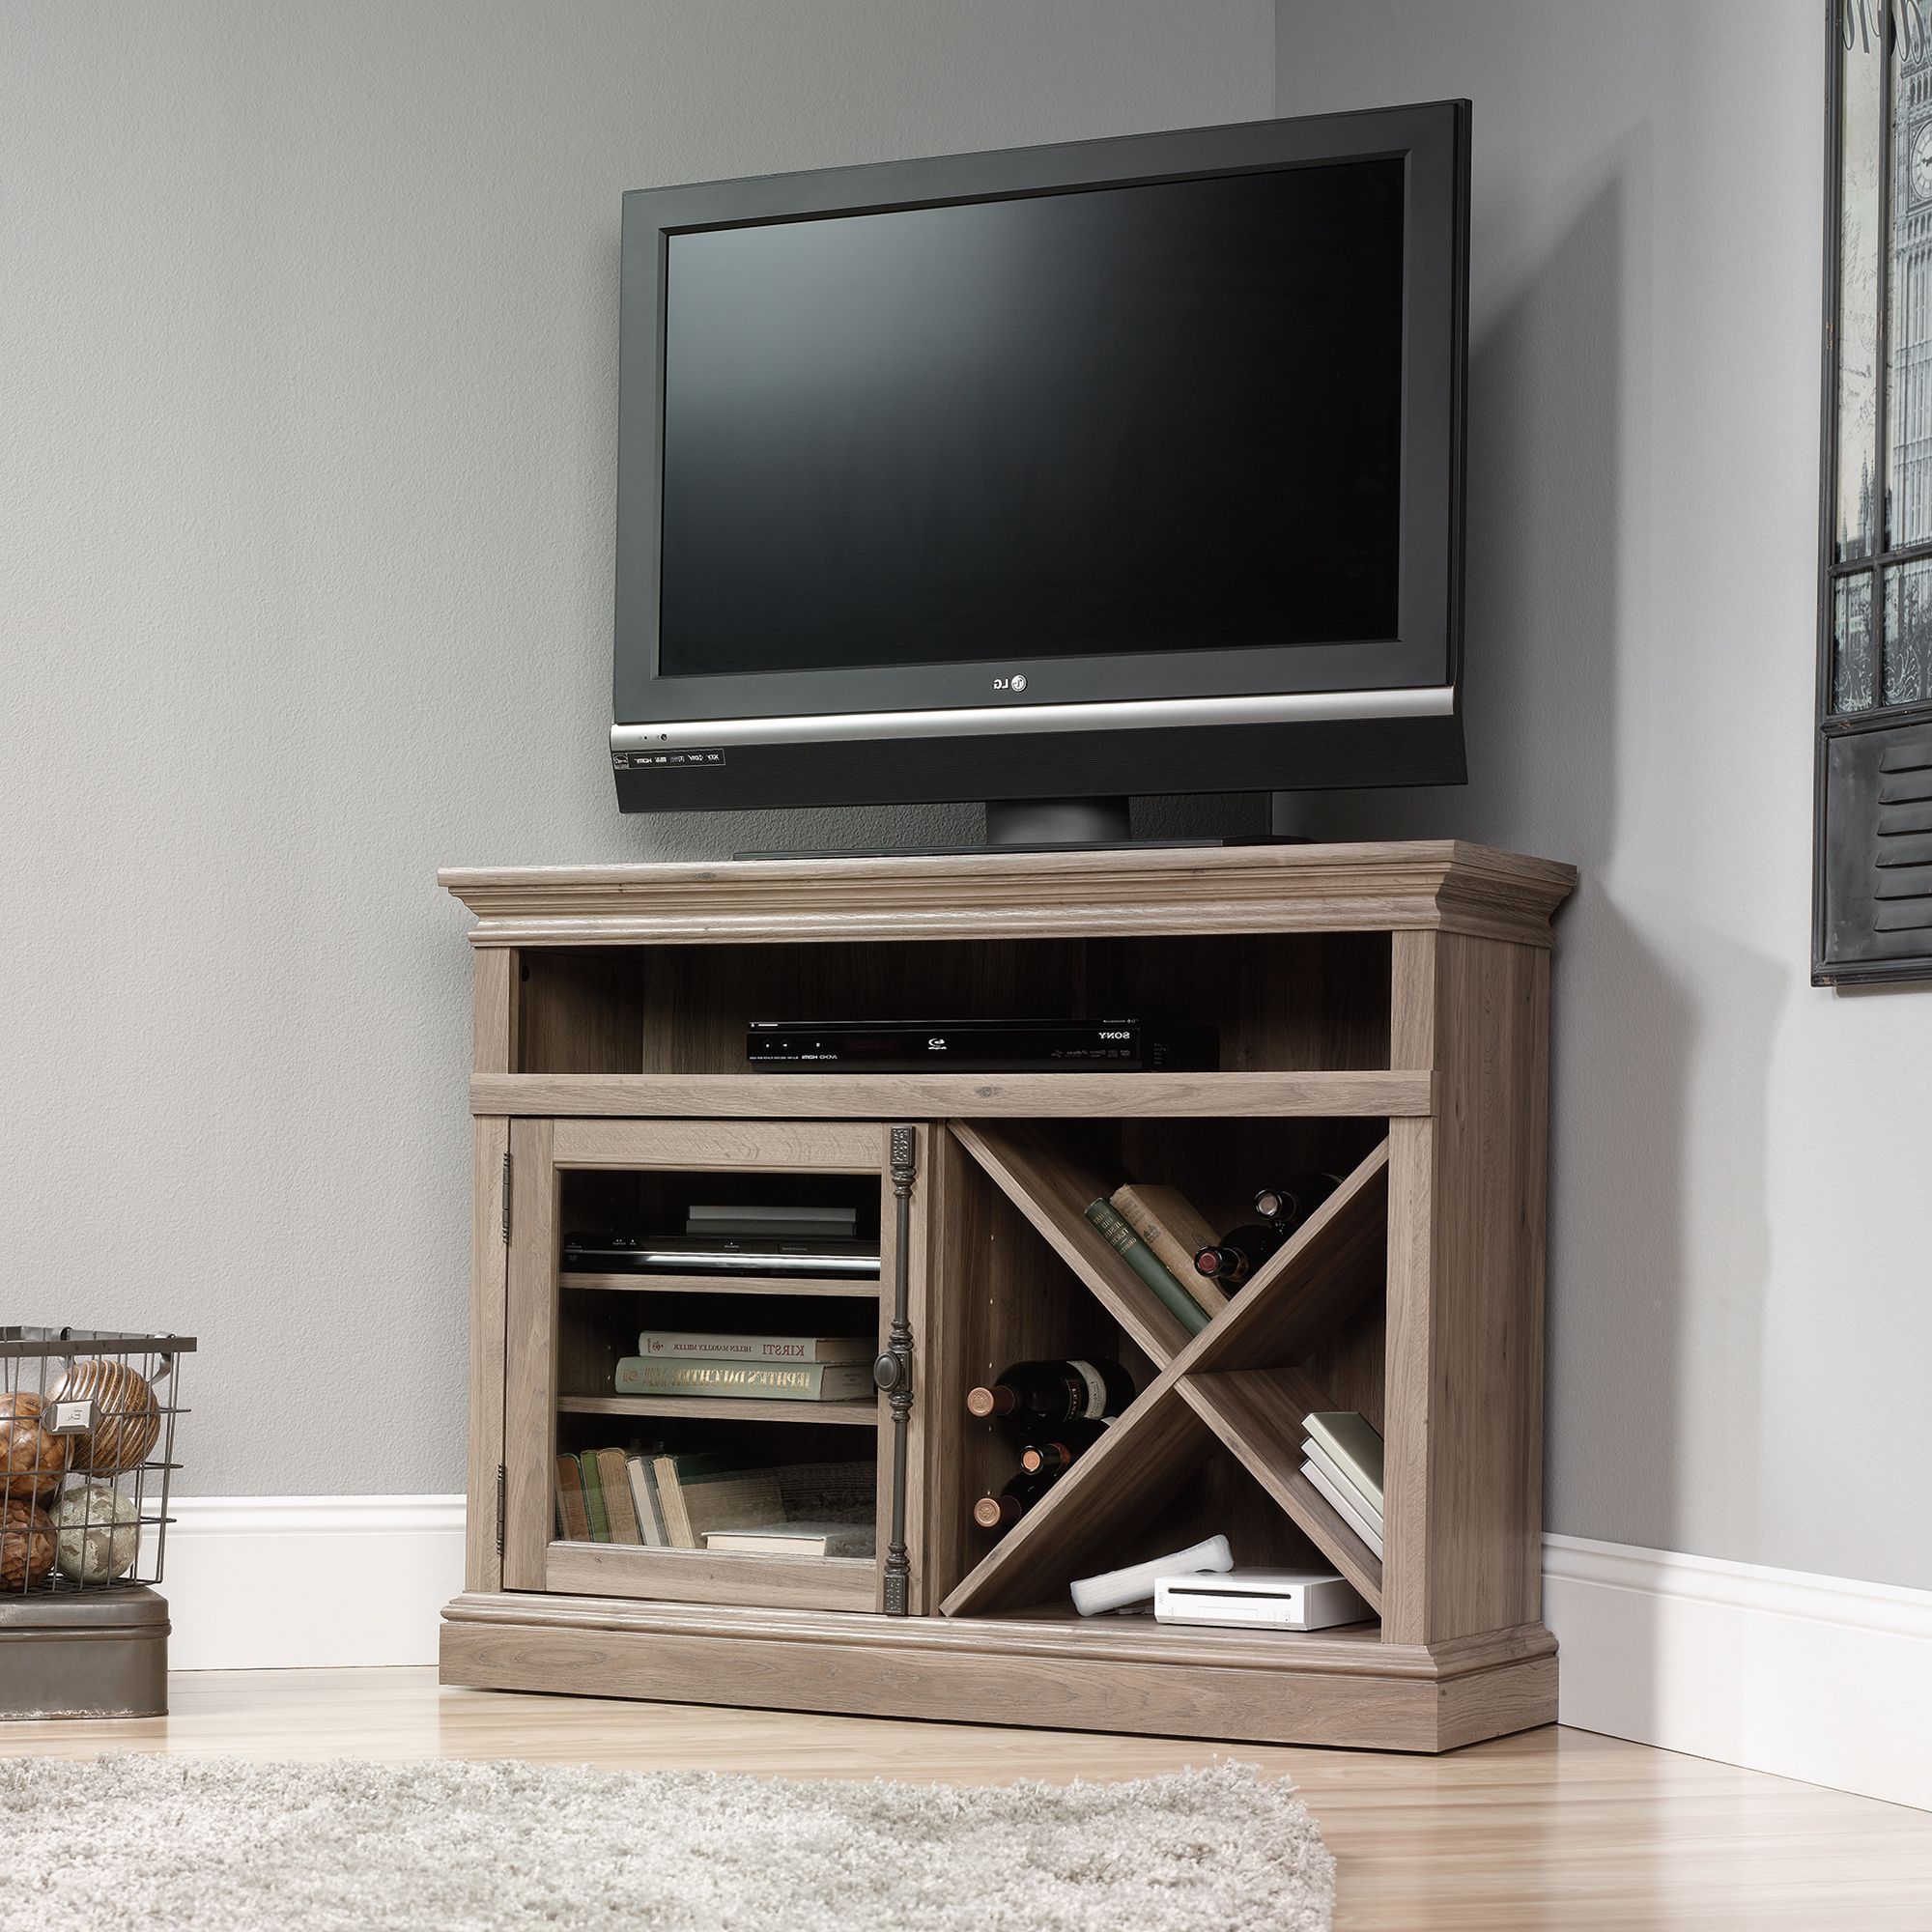 The Best Corner Tv Stands With Drawers